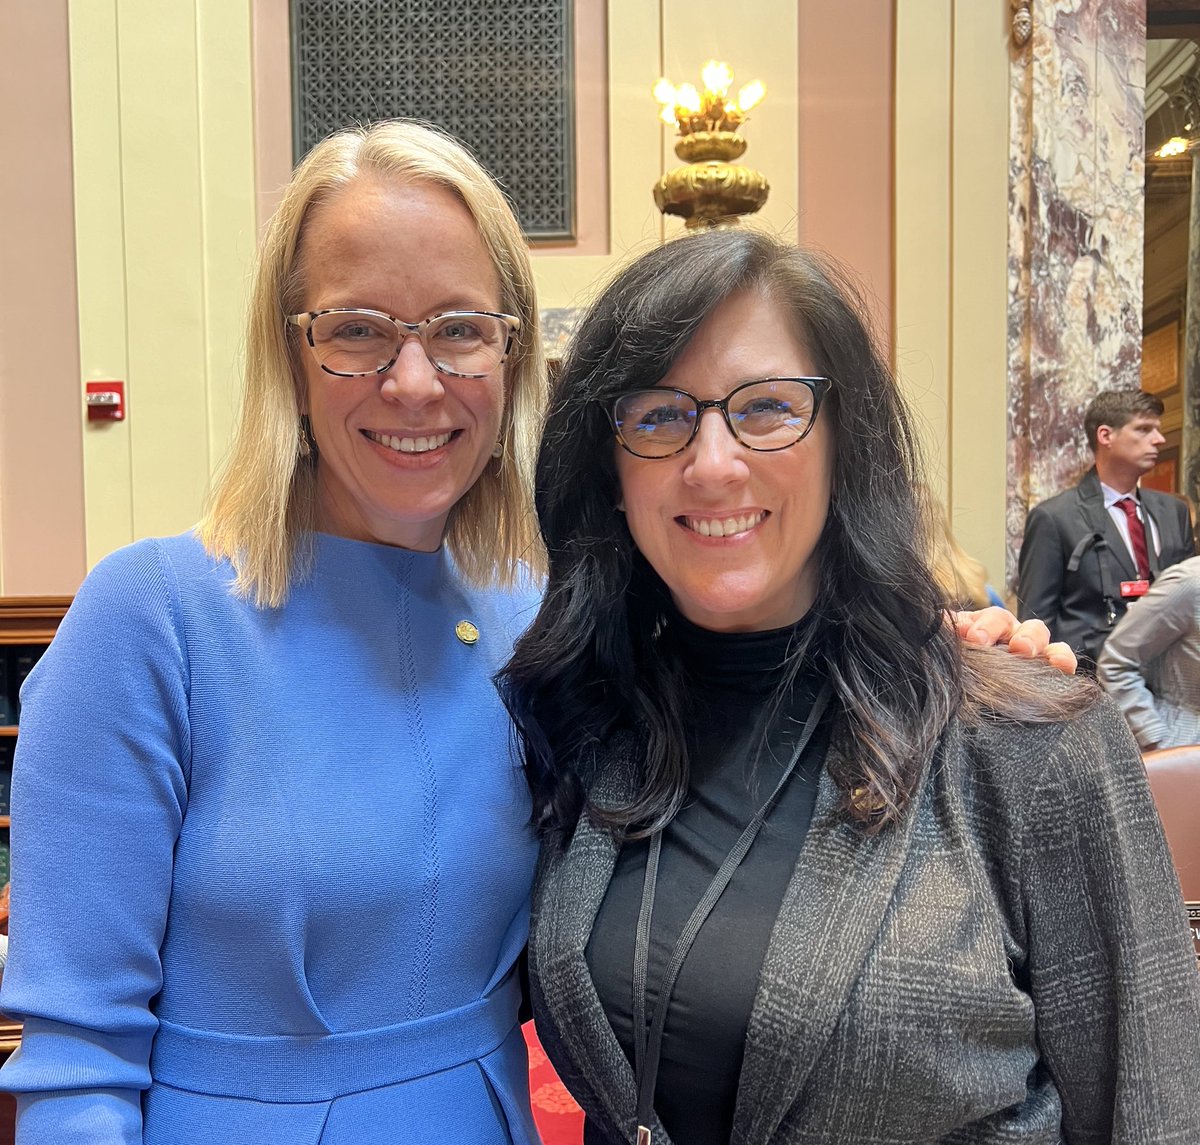 Proud of and grateful to my colleague @gus_heather for her tireless work with law enforcement, advocates, constituents & colleagues to pass a bill to strengthen Minnesota’s straw purchases statute. It will help decrease gun violence and save lives. #GunViolencePrevention